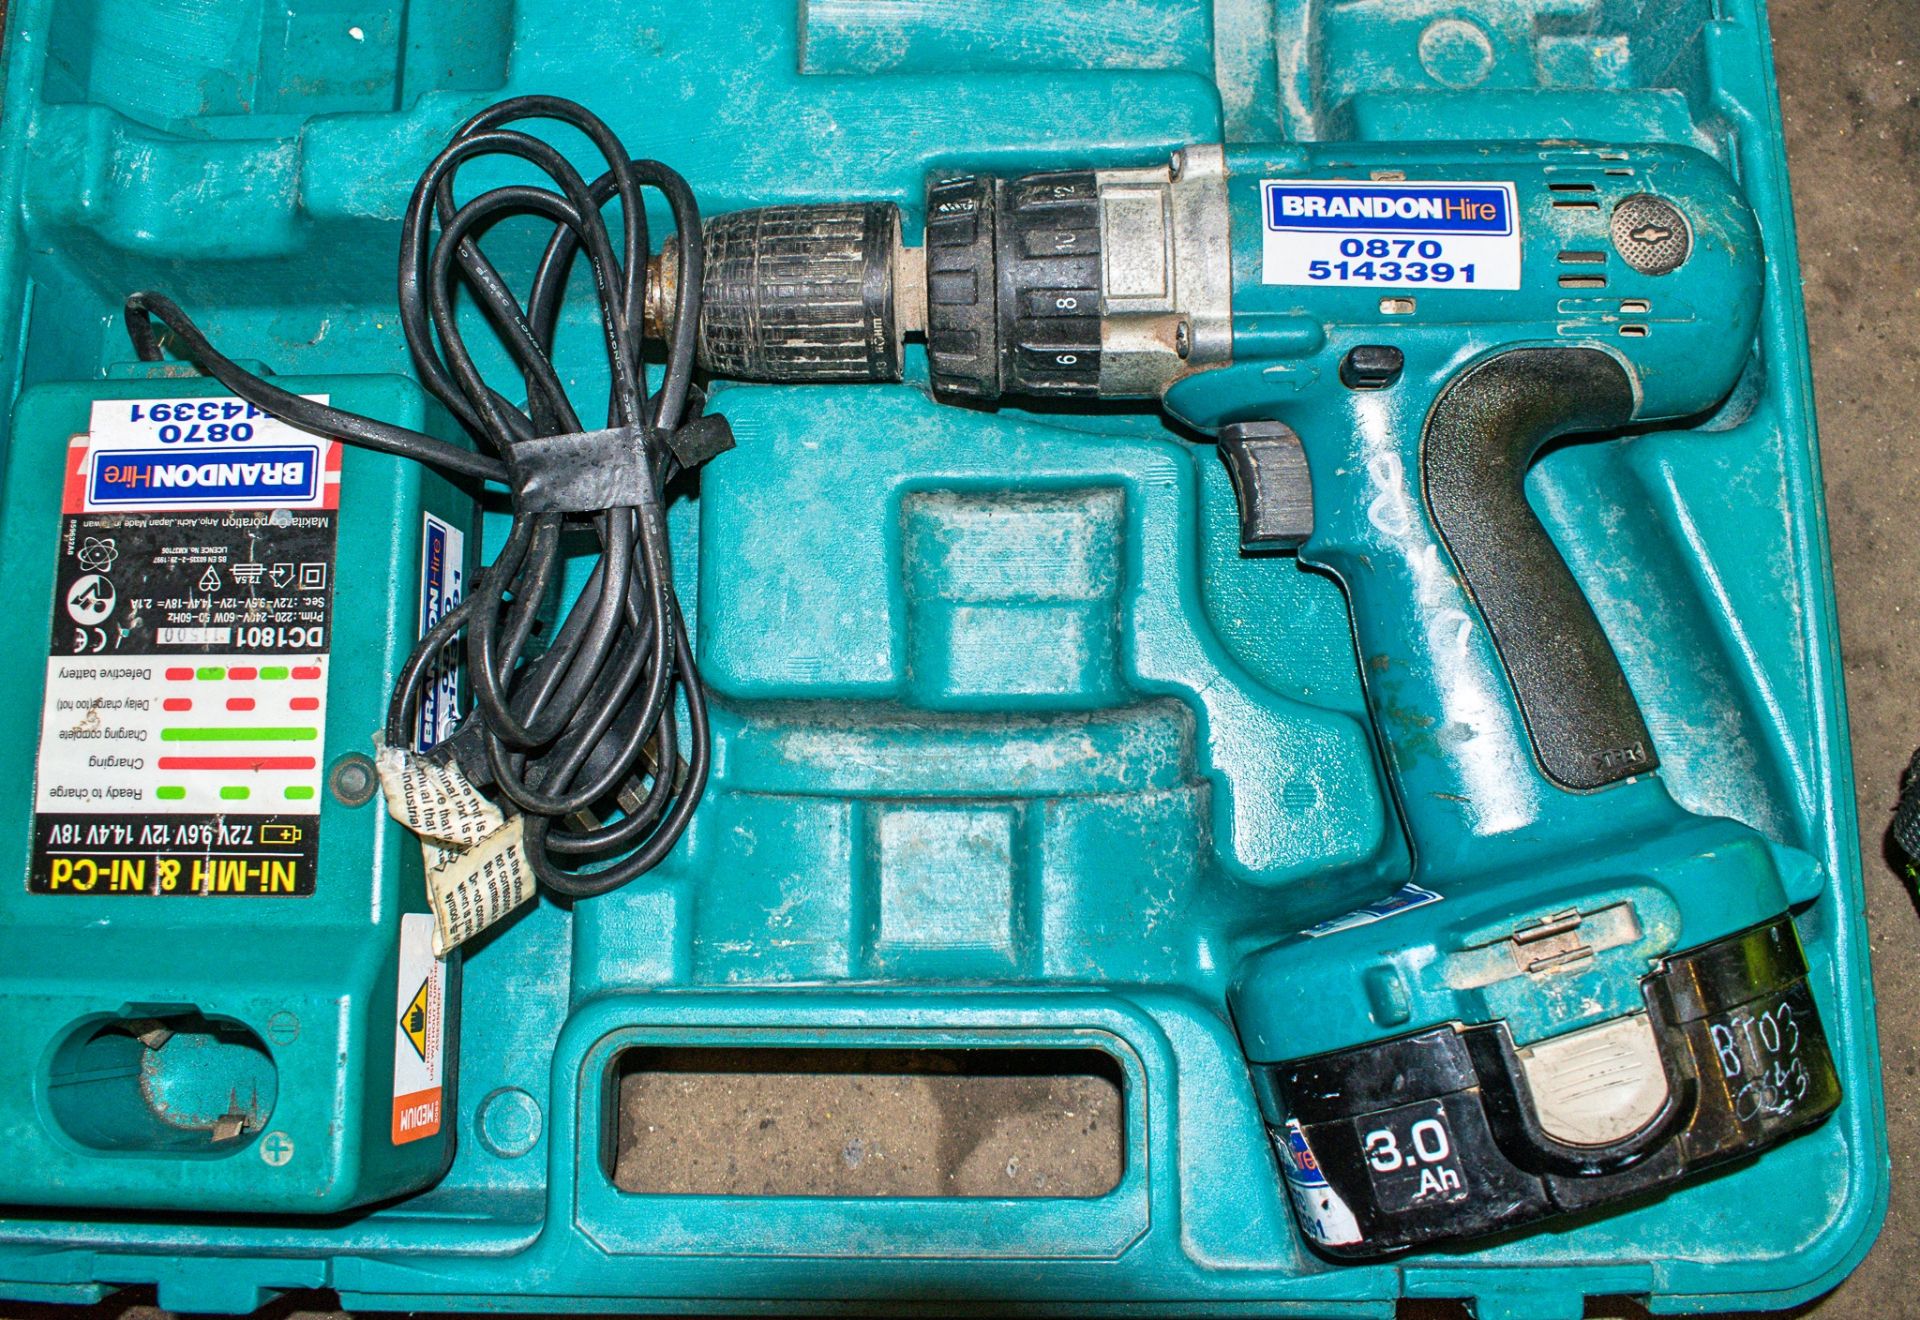 Makita 18v cordless power drill c/w charger, battery & carry case